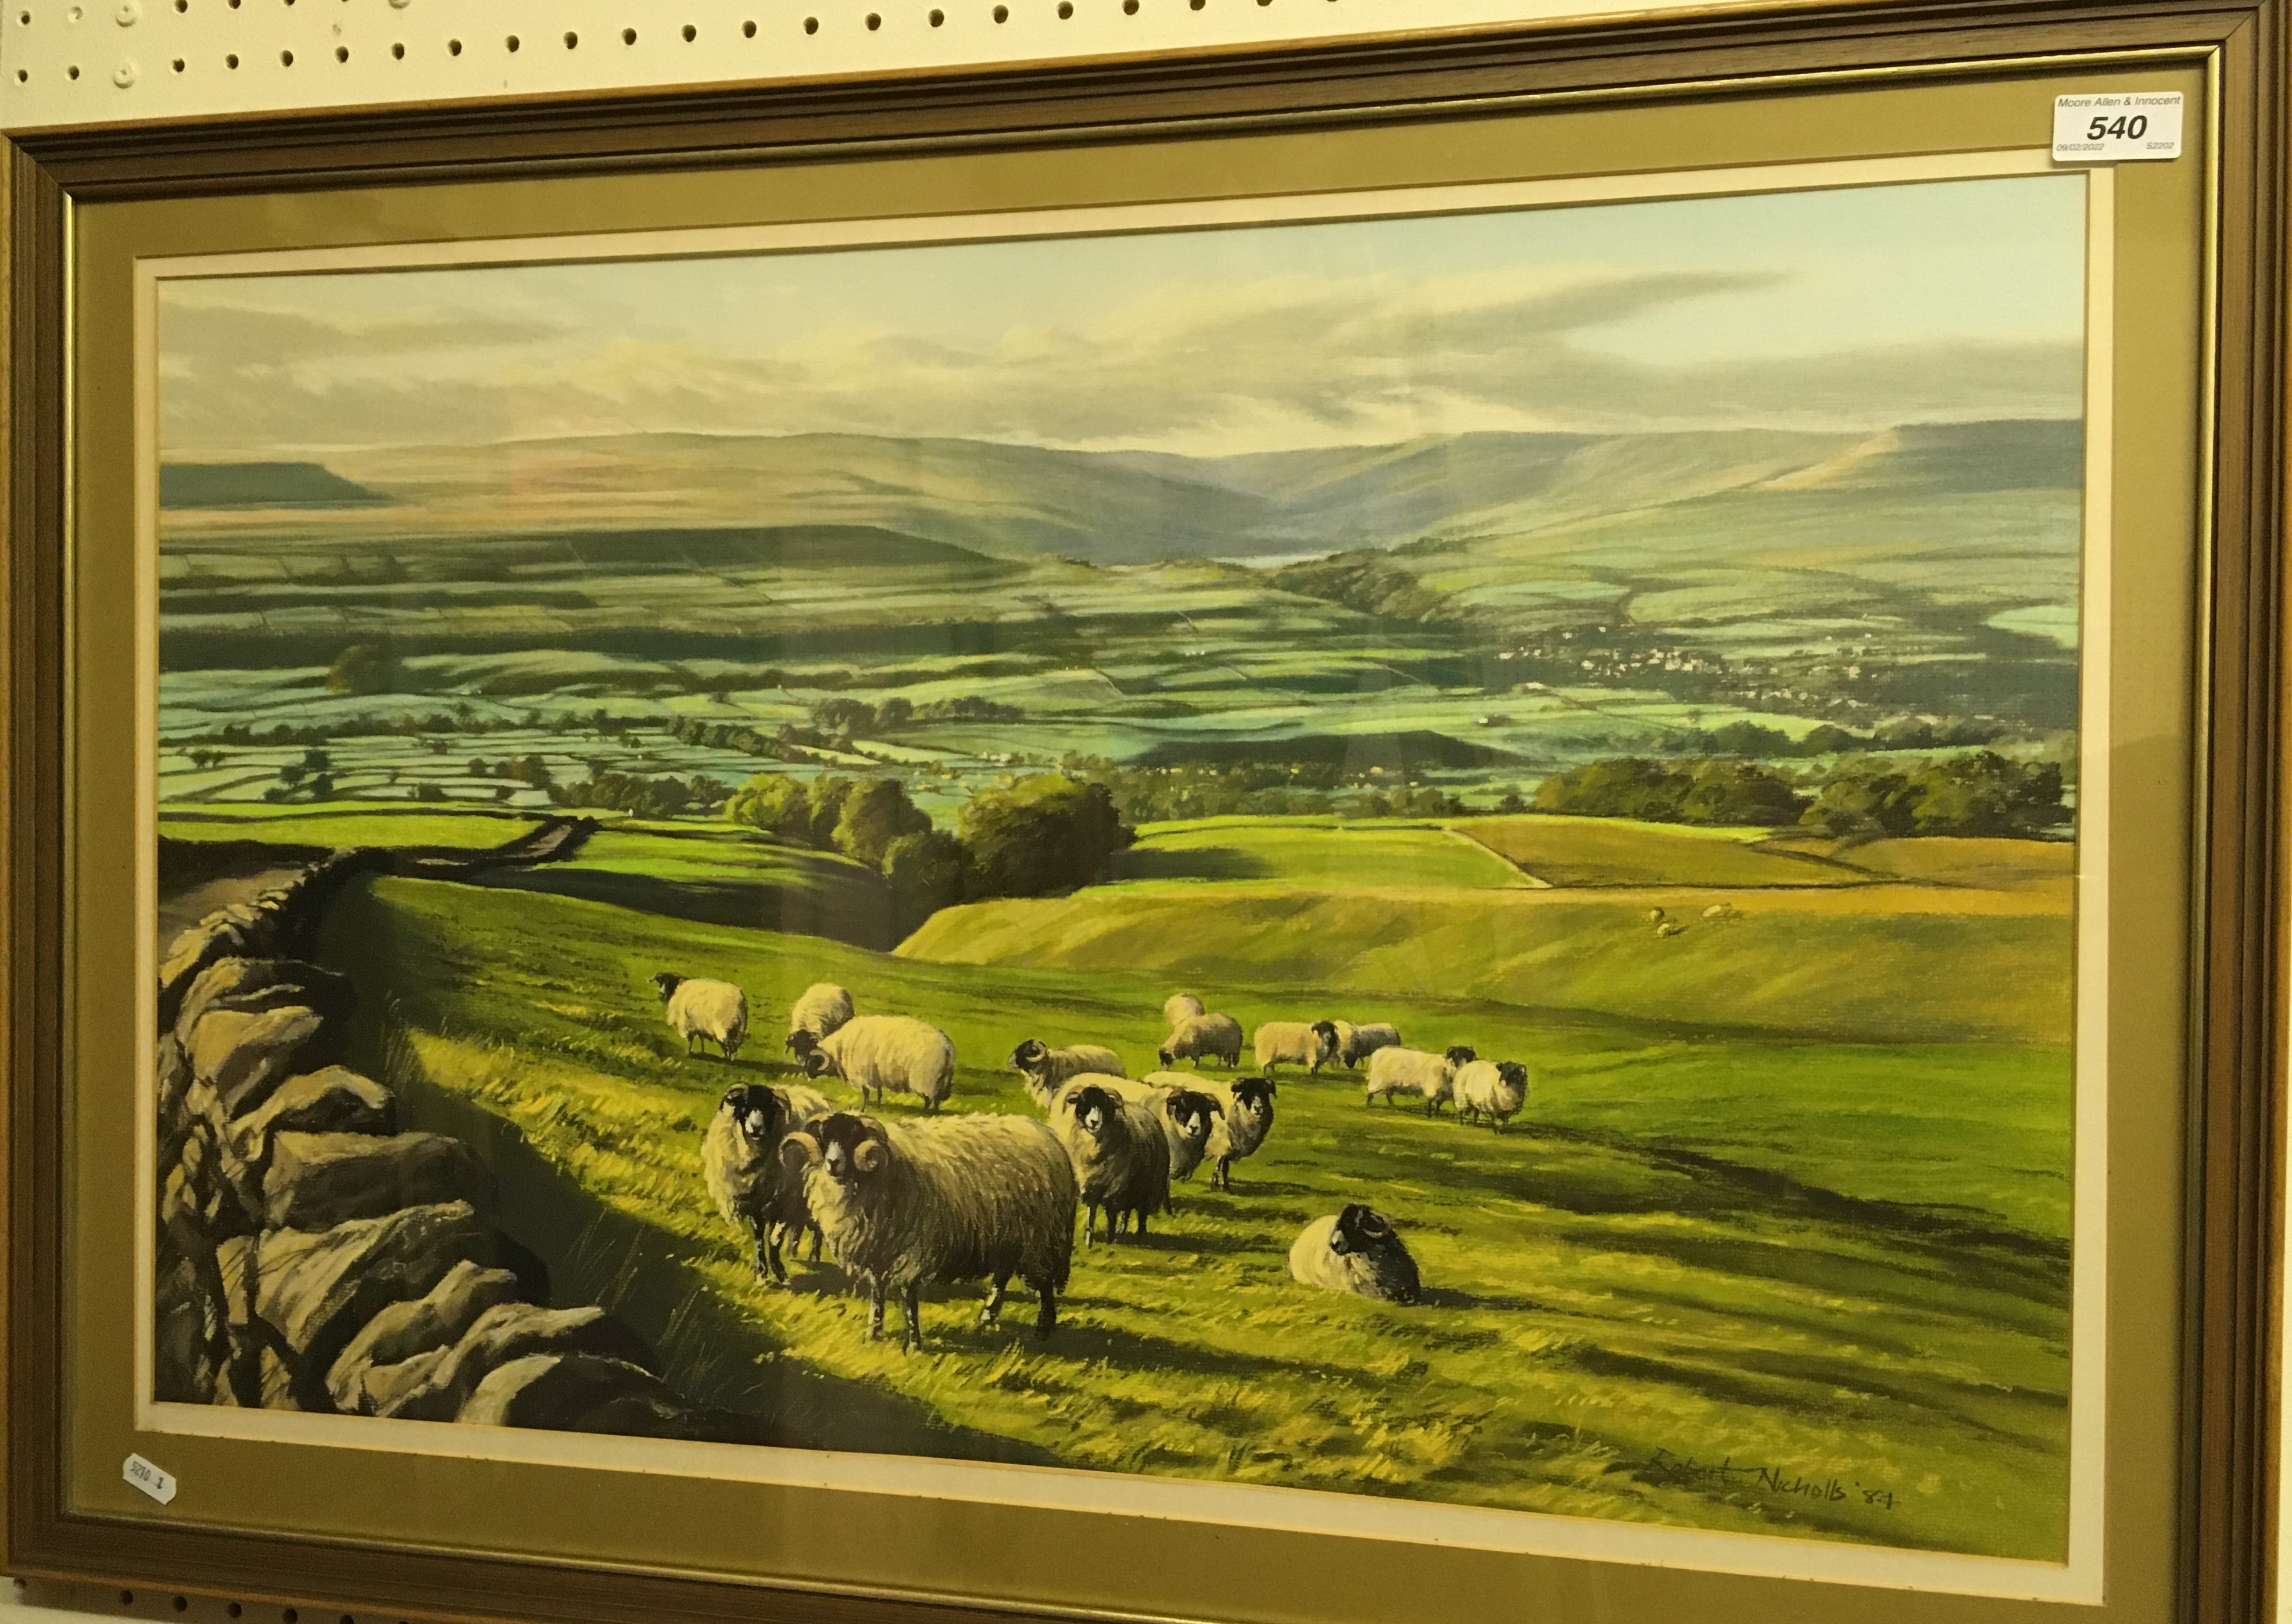 ROBERT NICHOLLS "Sheep in hilly landscape", pastel, signed and date '84 lower right, - Image 2 of 2